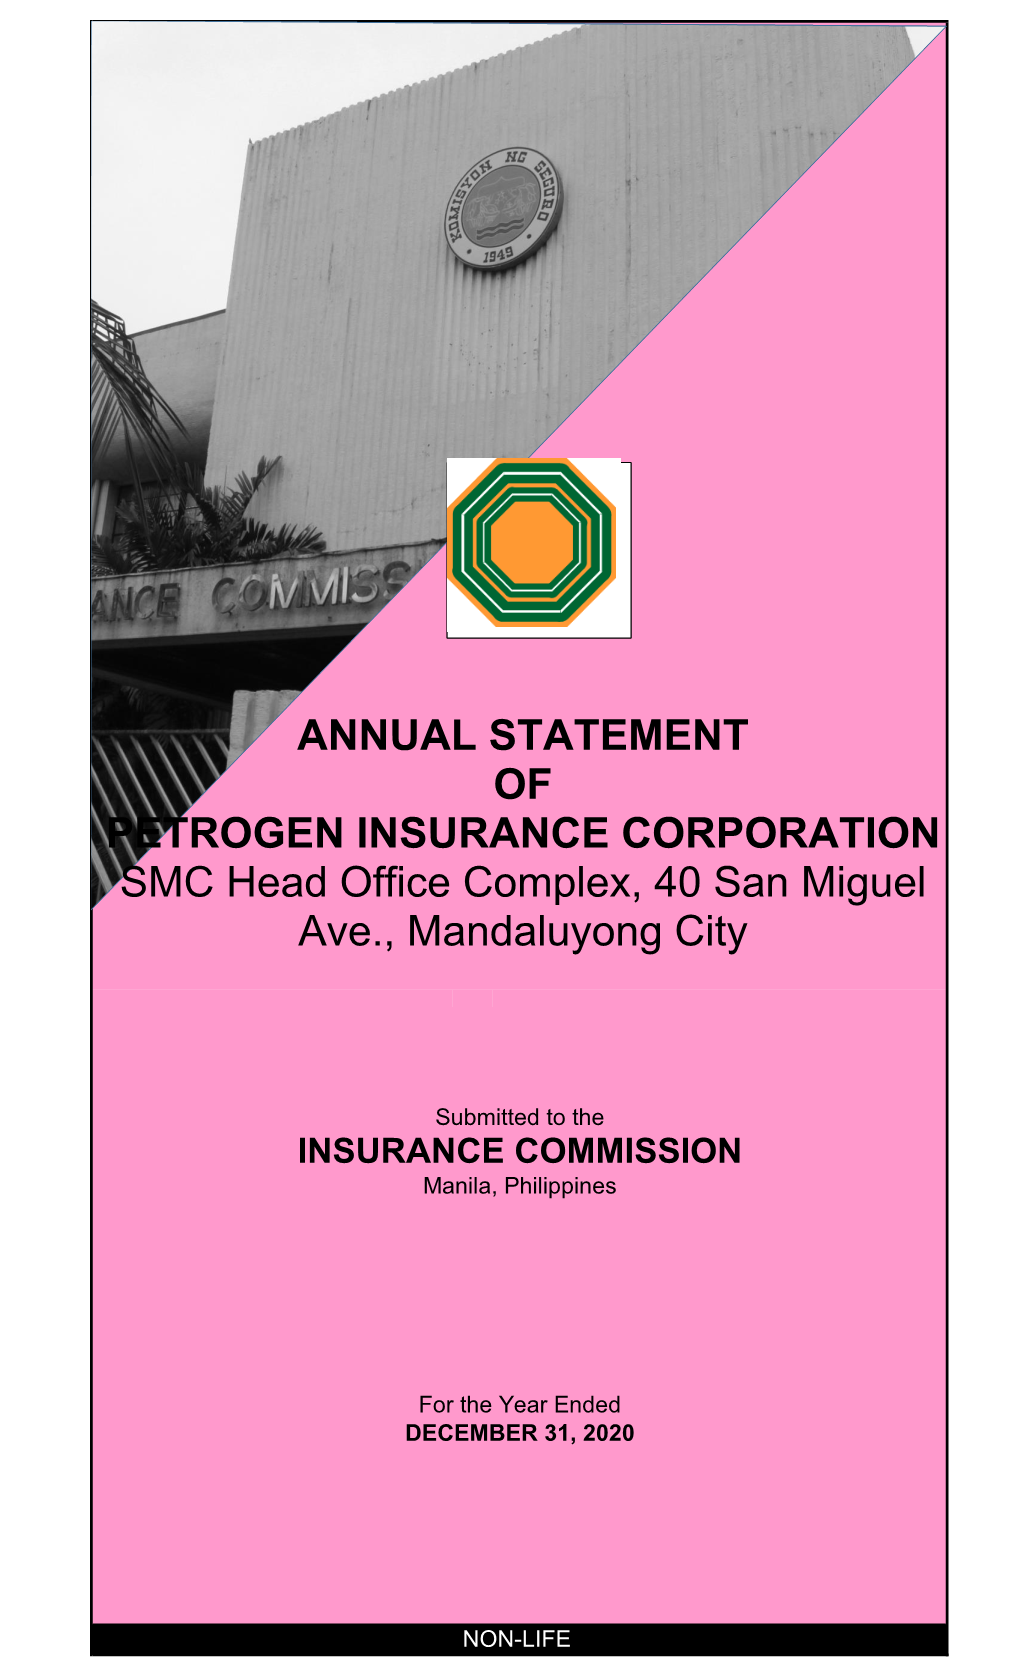 ANNUAL STATEMENT of PETROGEN INSURANCE CORPORATION SMC Head Office Complex, 40 San Miguel Ave., Mandaluyong City